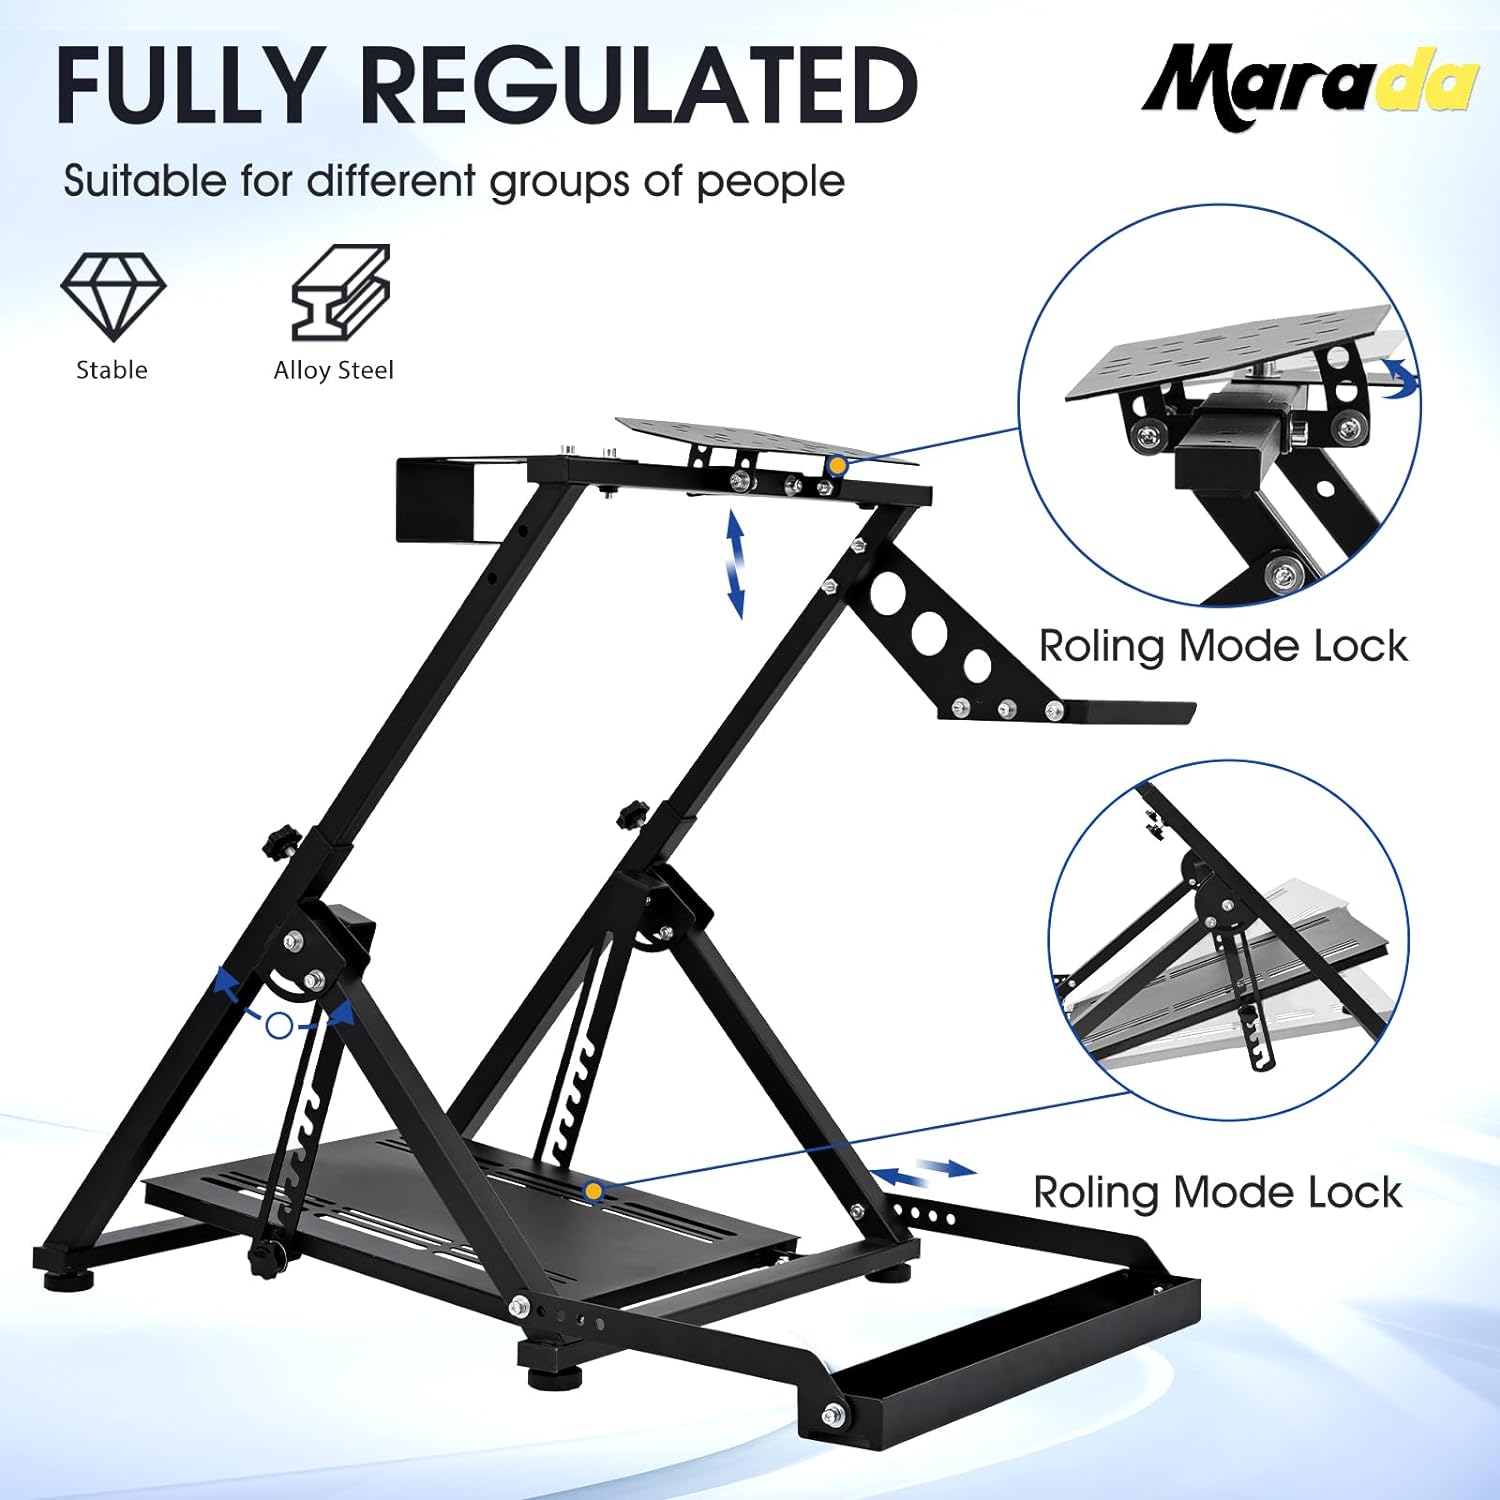 Marada X Frame Steering Wheel Stand Racing Sim Stand with Seat Slot Fit for Logitech,Thrustmaster,Fanatec,G25 G27 G29 G920 T300 T248,Racing Simulator Cockpit, No Wheel Pedal Shifter